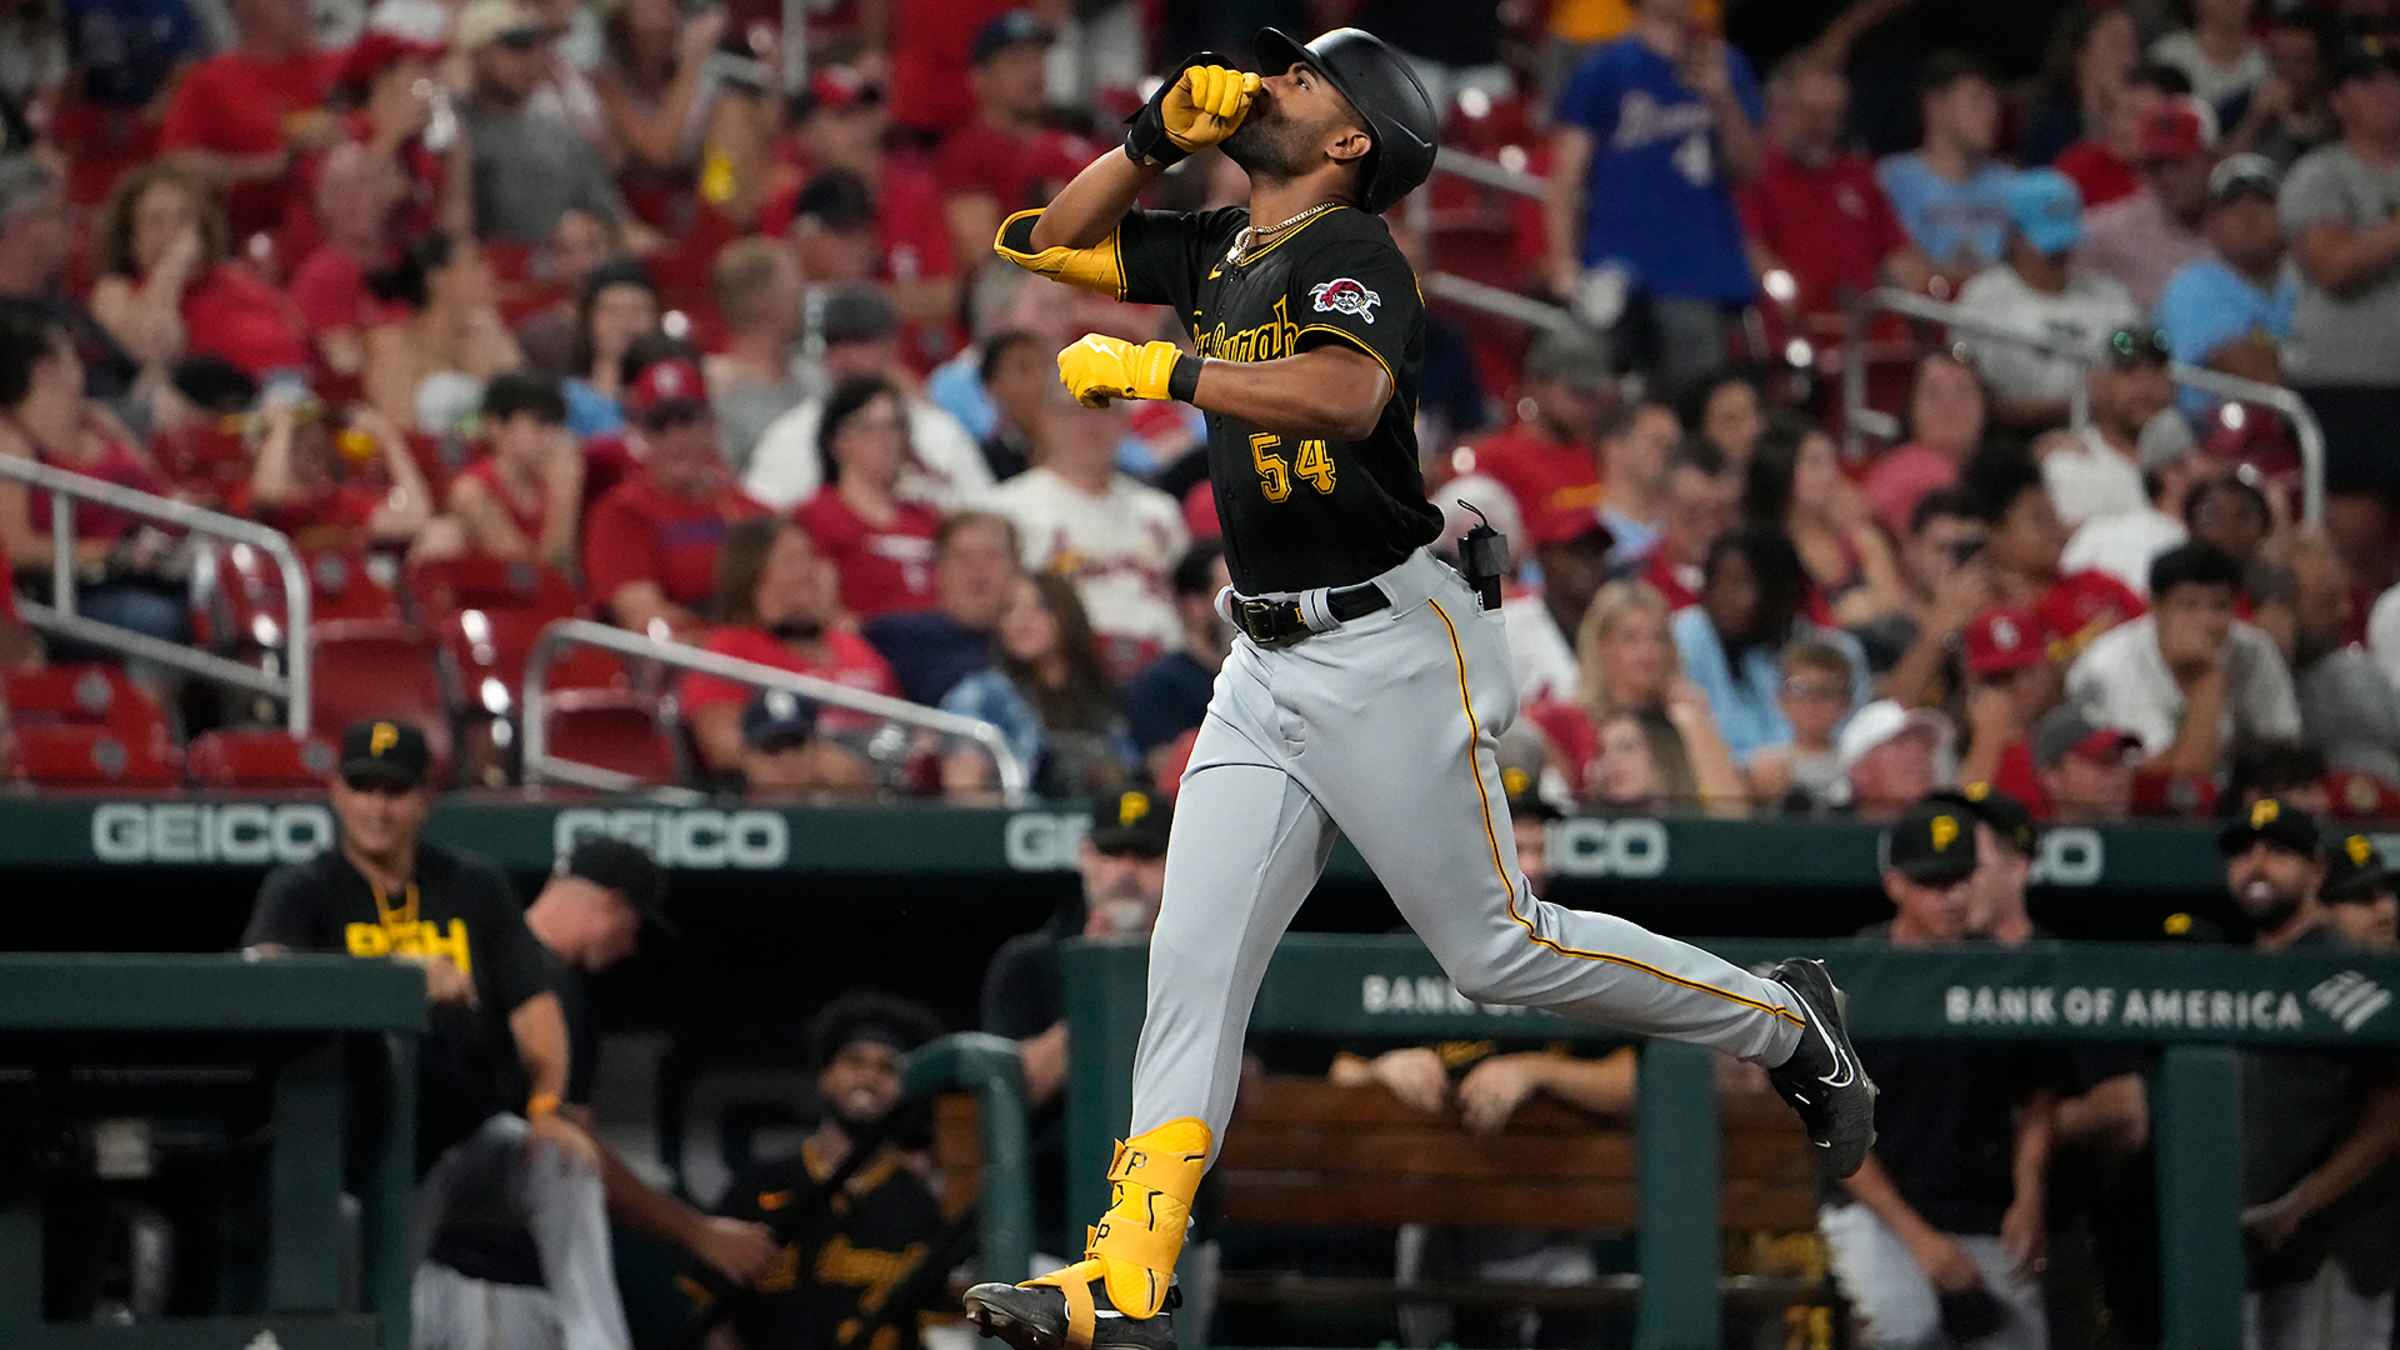 Palacios delivers a clutch double in the 9th as the Pirates rally